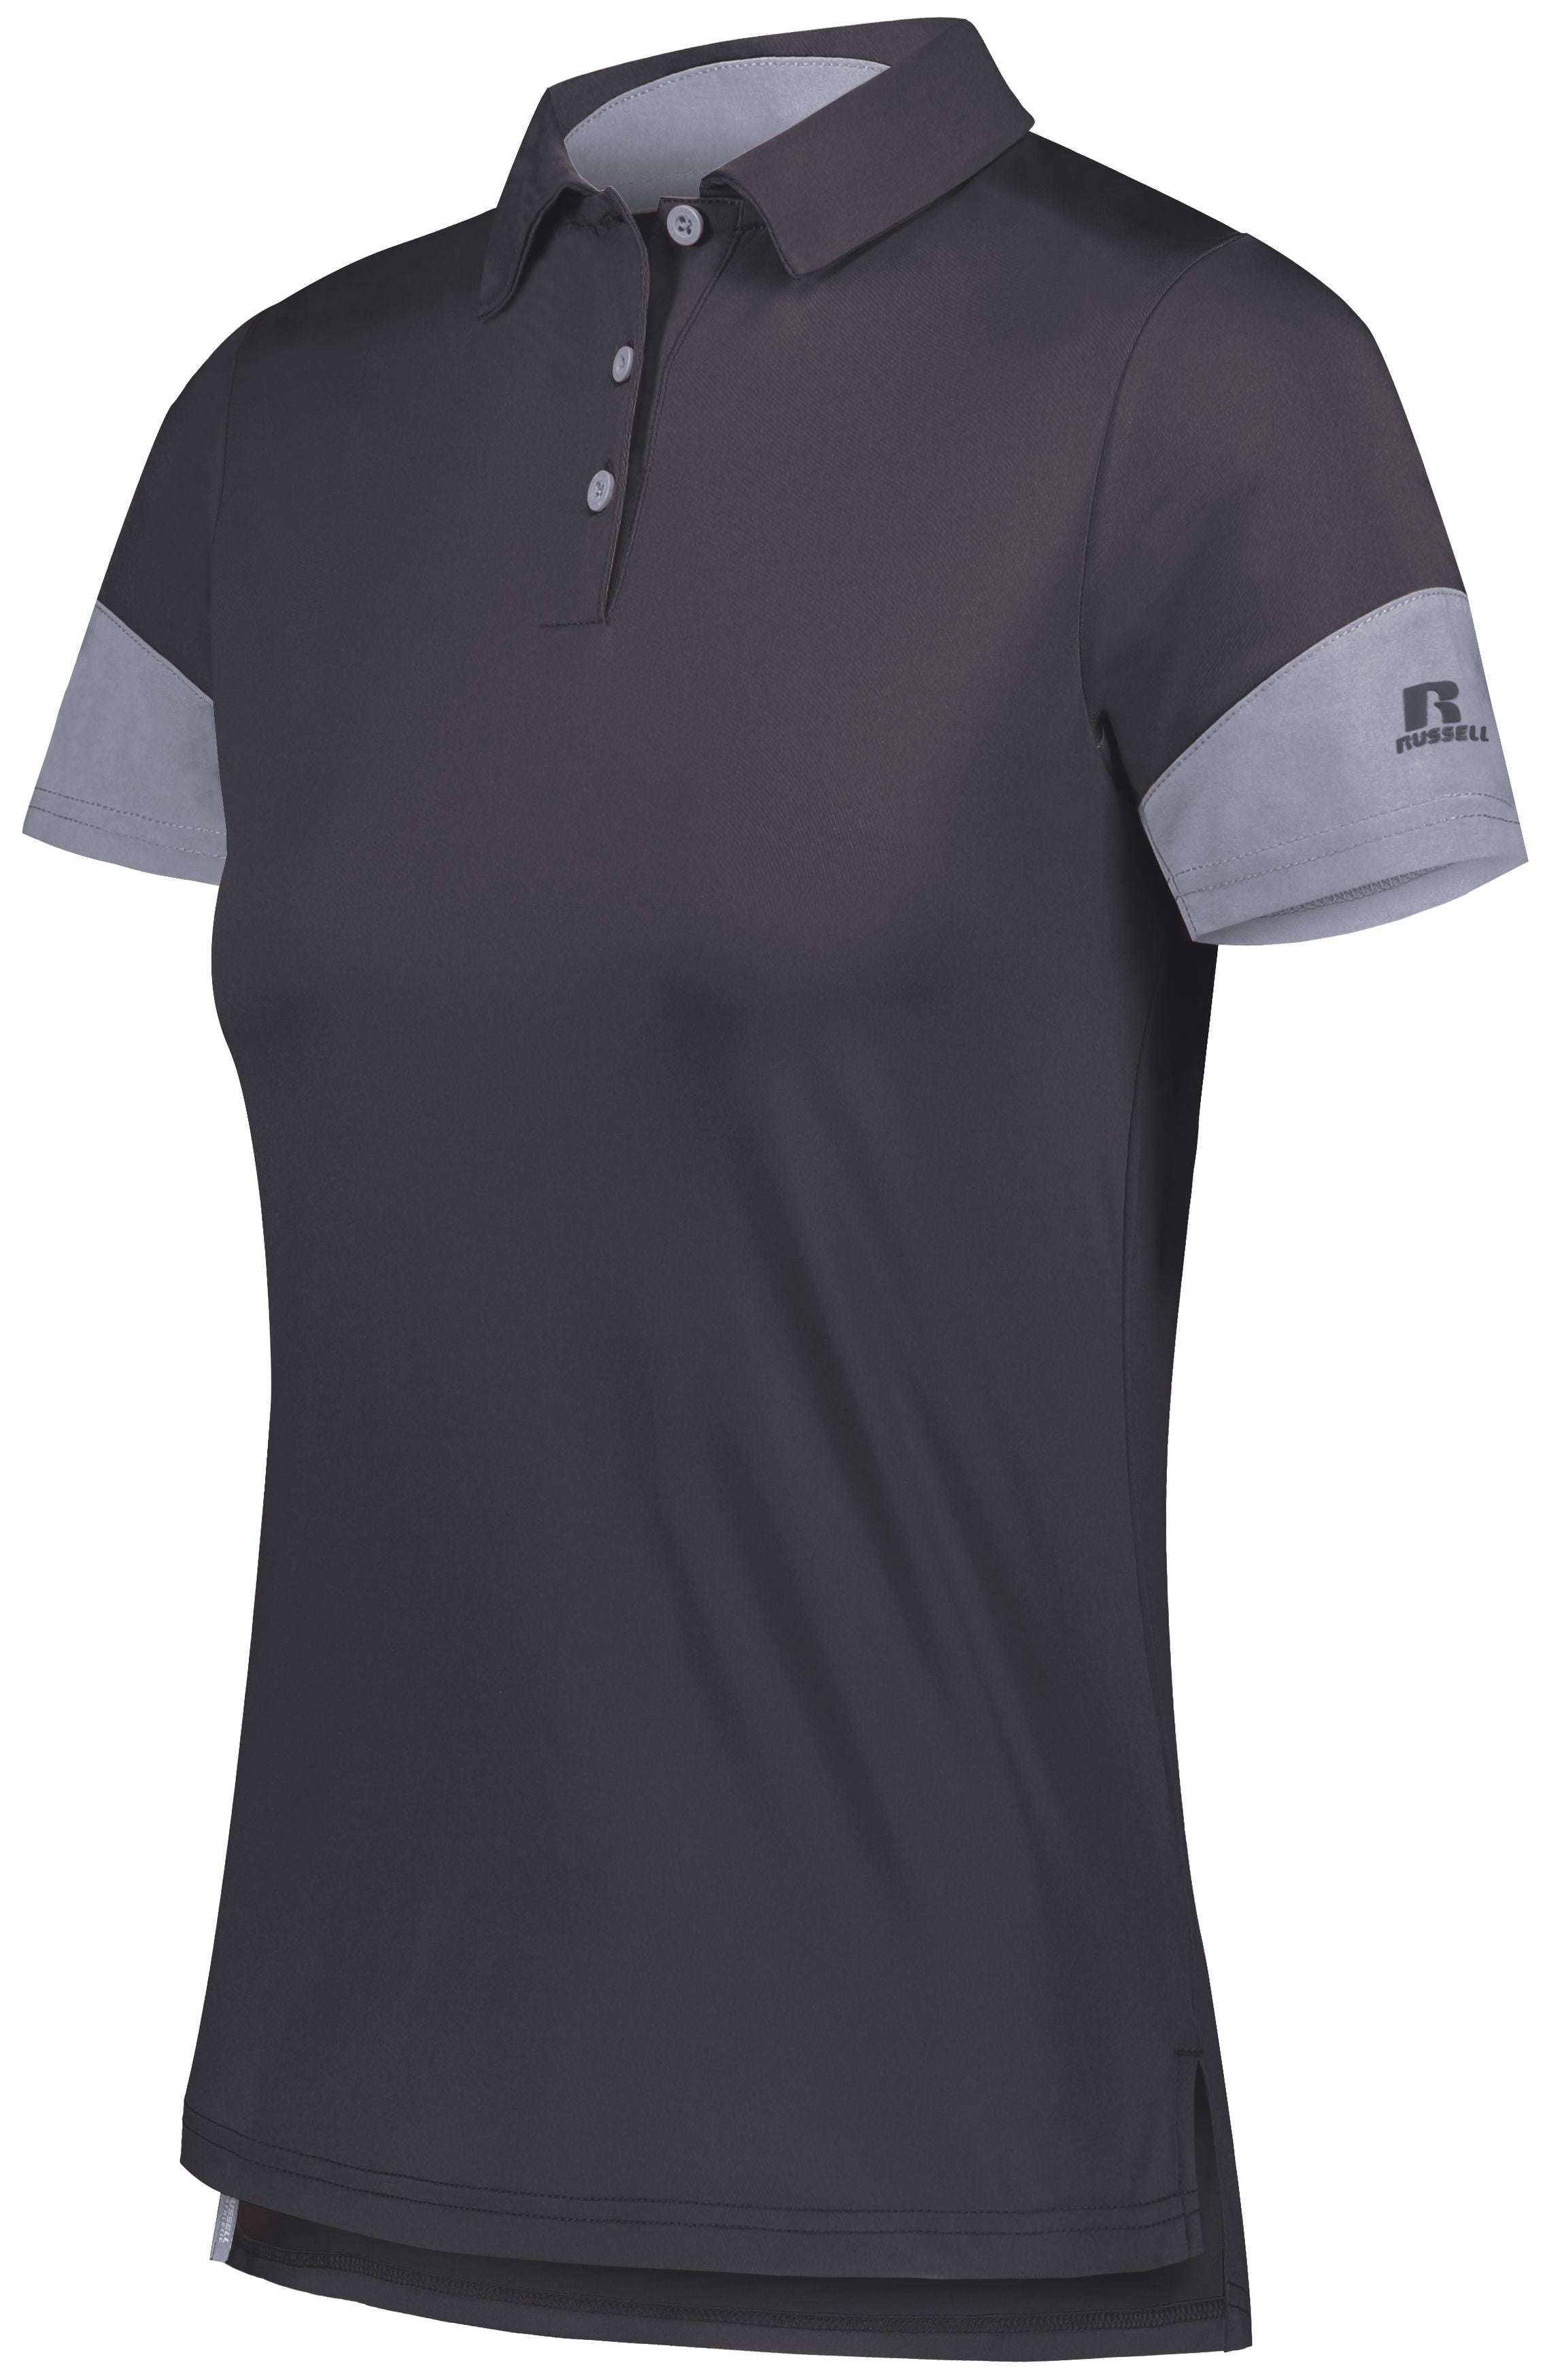 Russell Athletic Ladies Hybrid Polo in Stealth/Steel  -Part of the Ladies, Ladies-Polo, Polos, Russell-Athletic-Products, Shirts product lines at KanaleyCreations.com